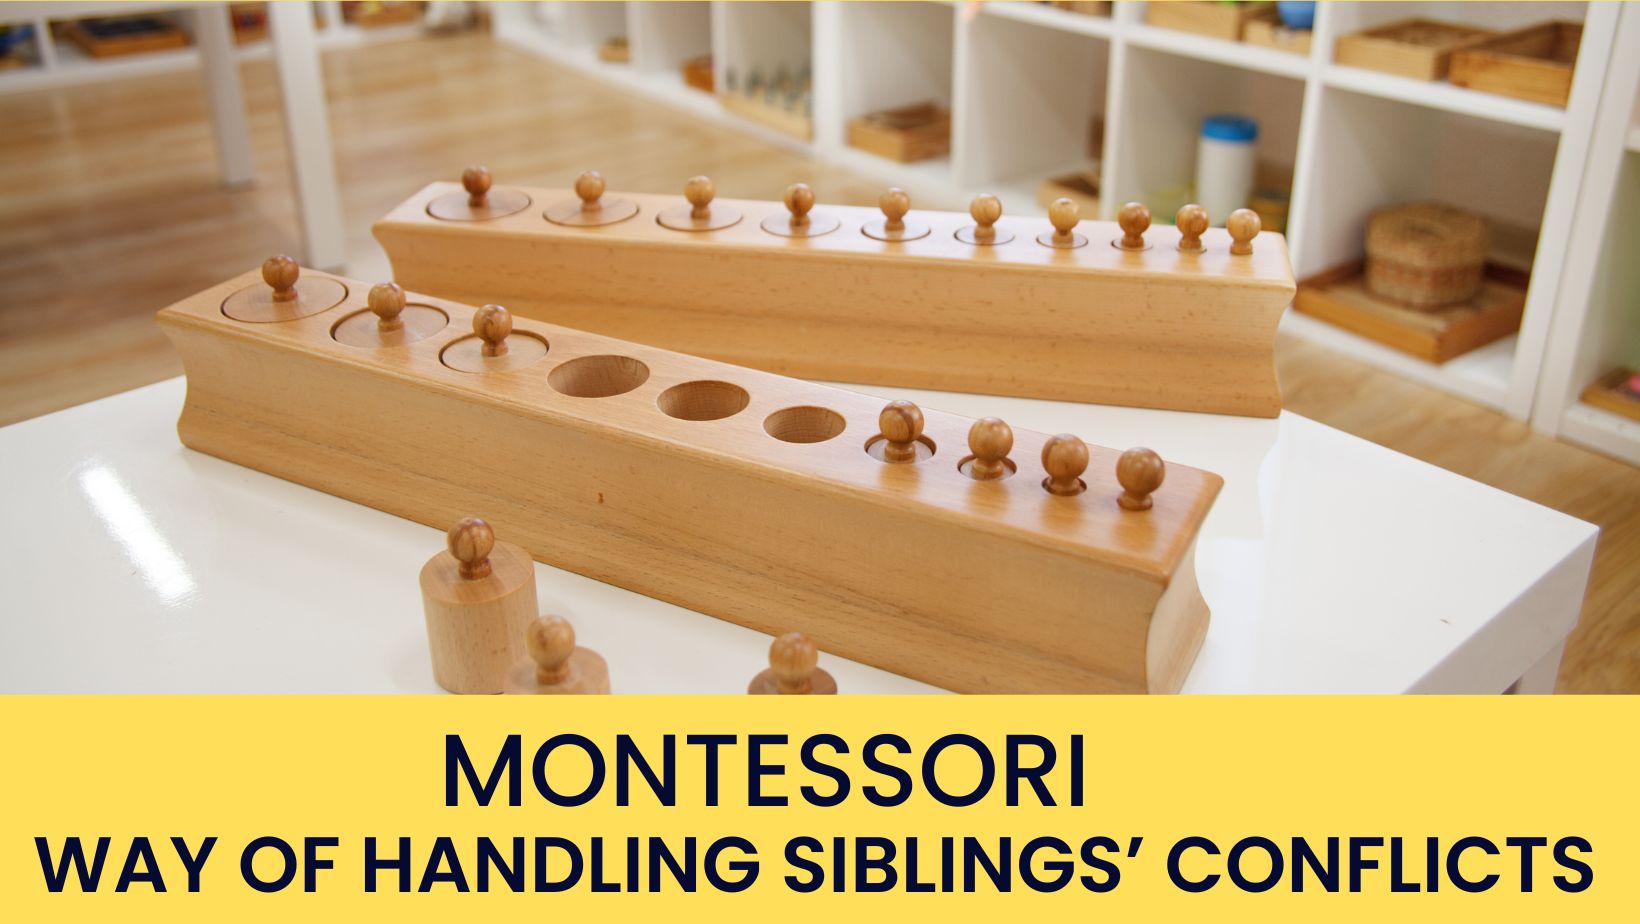 Montessori Way of Handling Siblings’ Conflicts